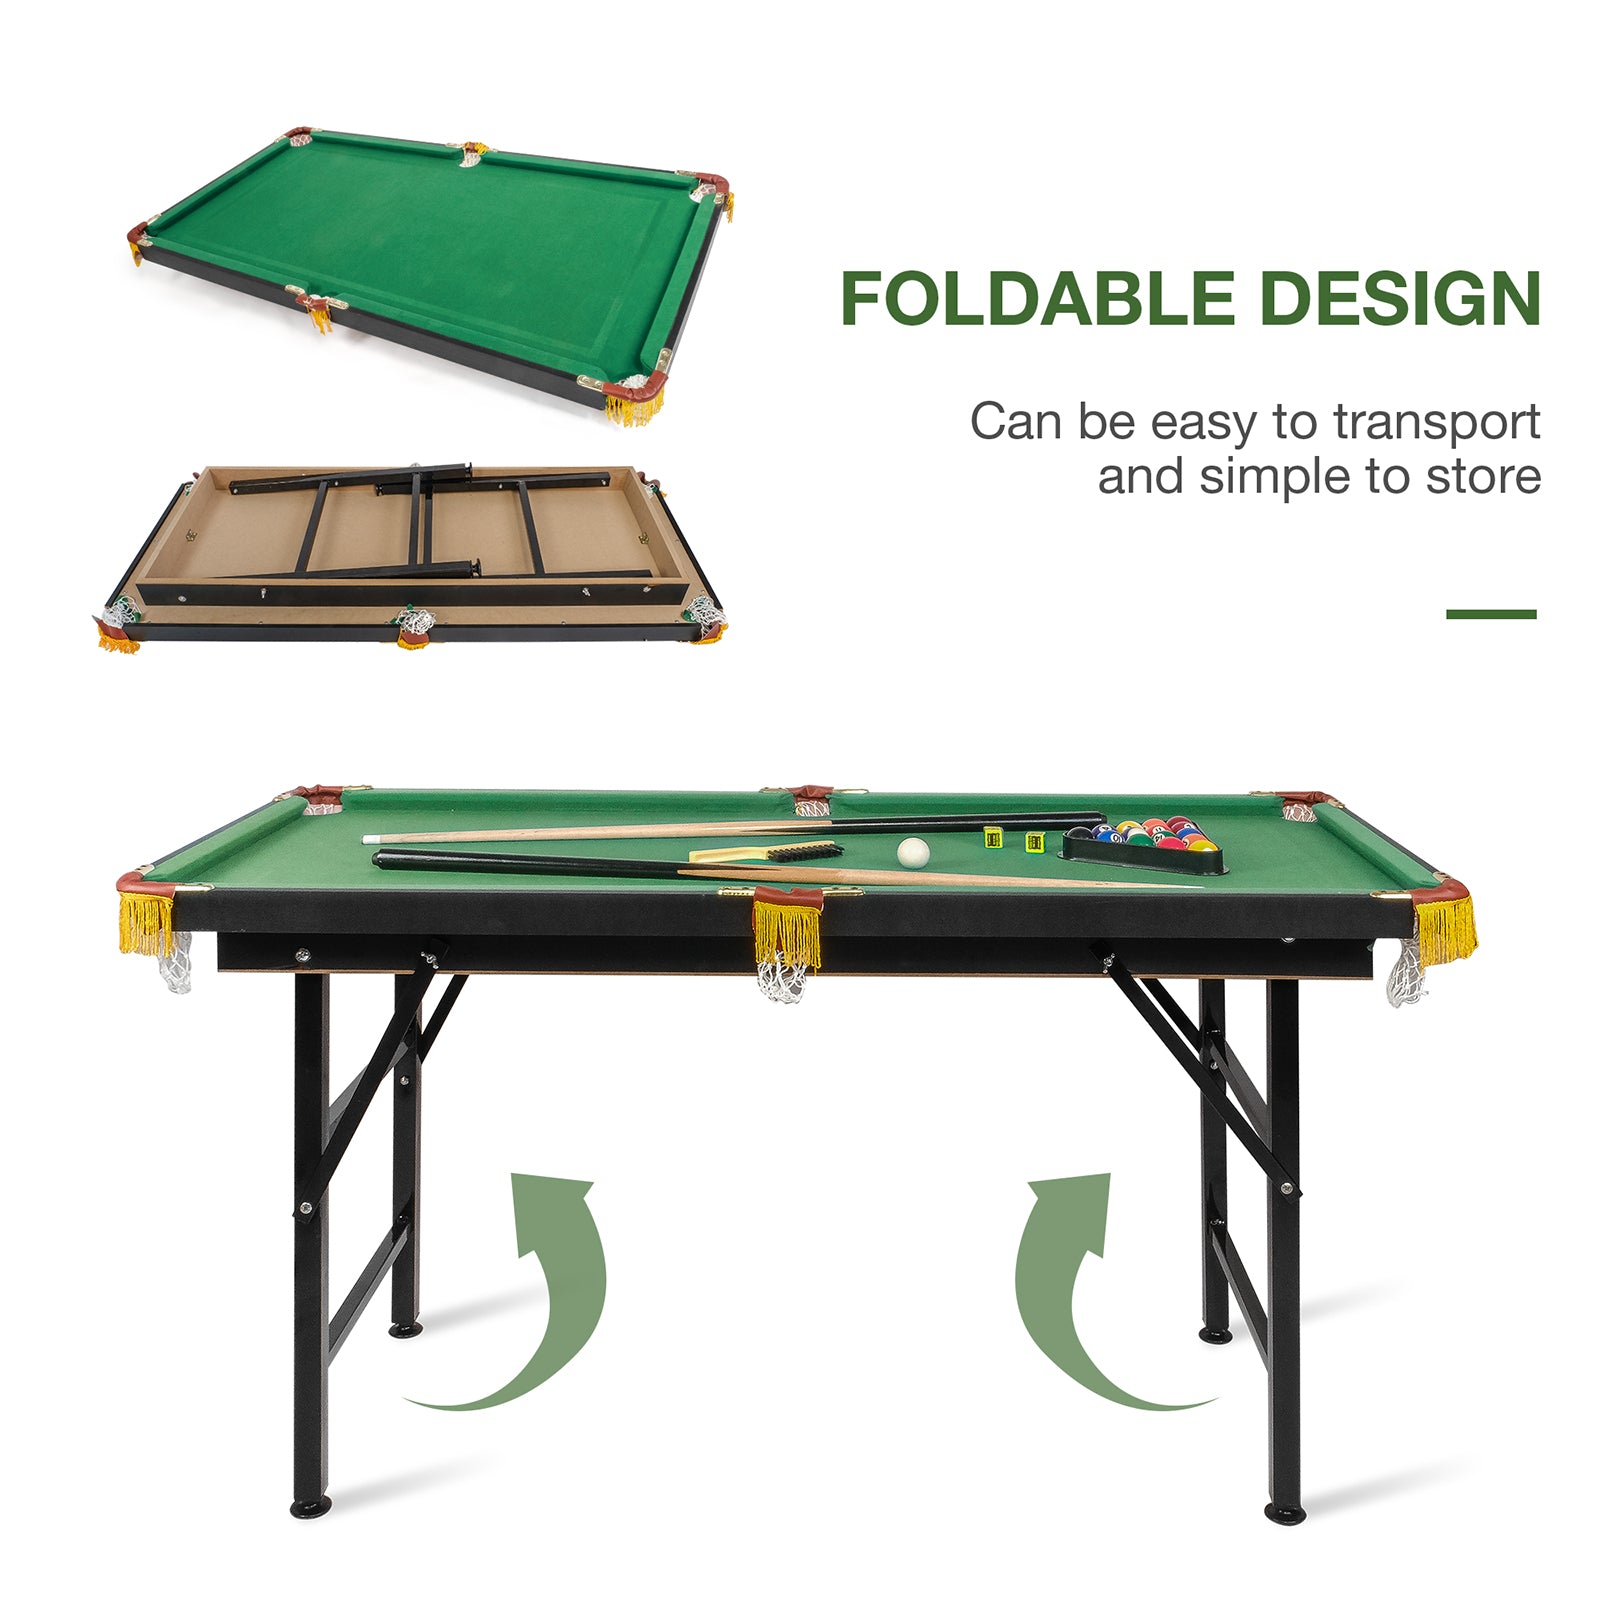 55" Portable Folding Pool Billiard Table Space Saver Game Table for Kids, Green